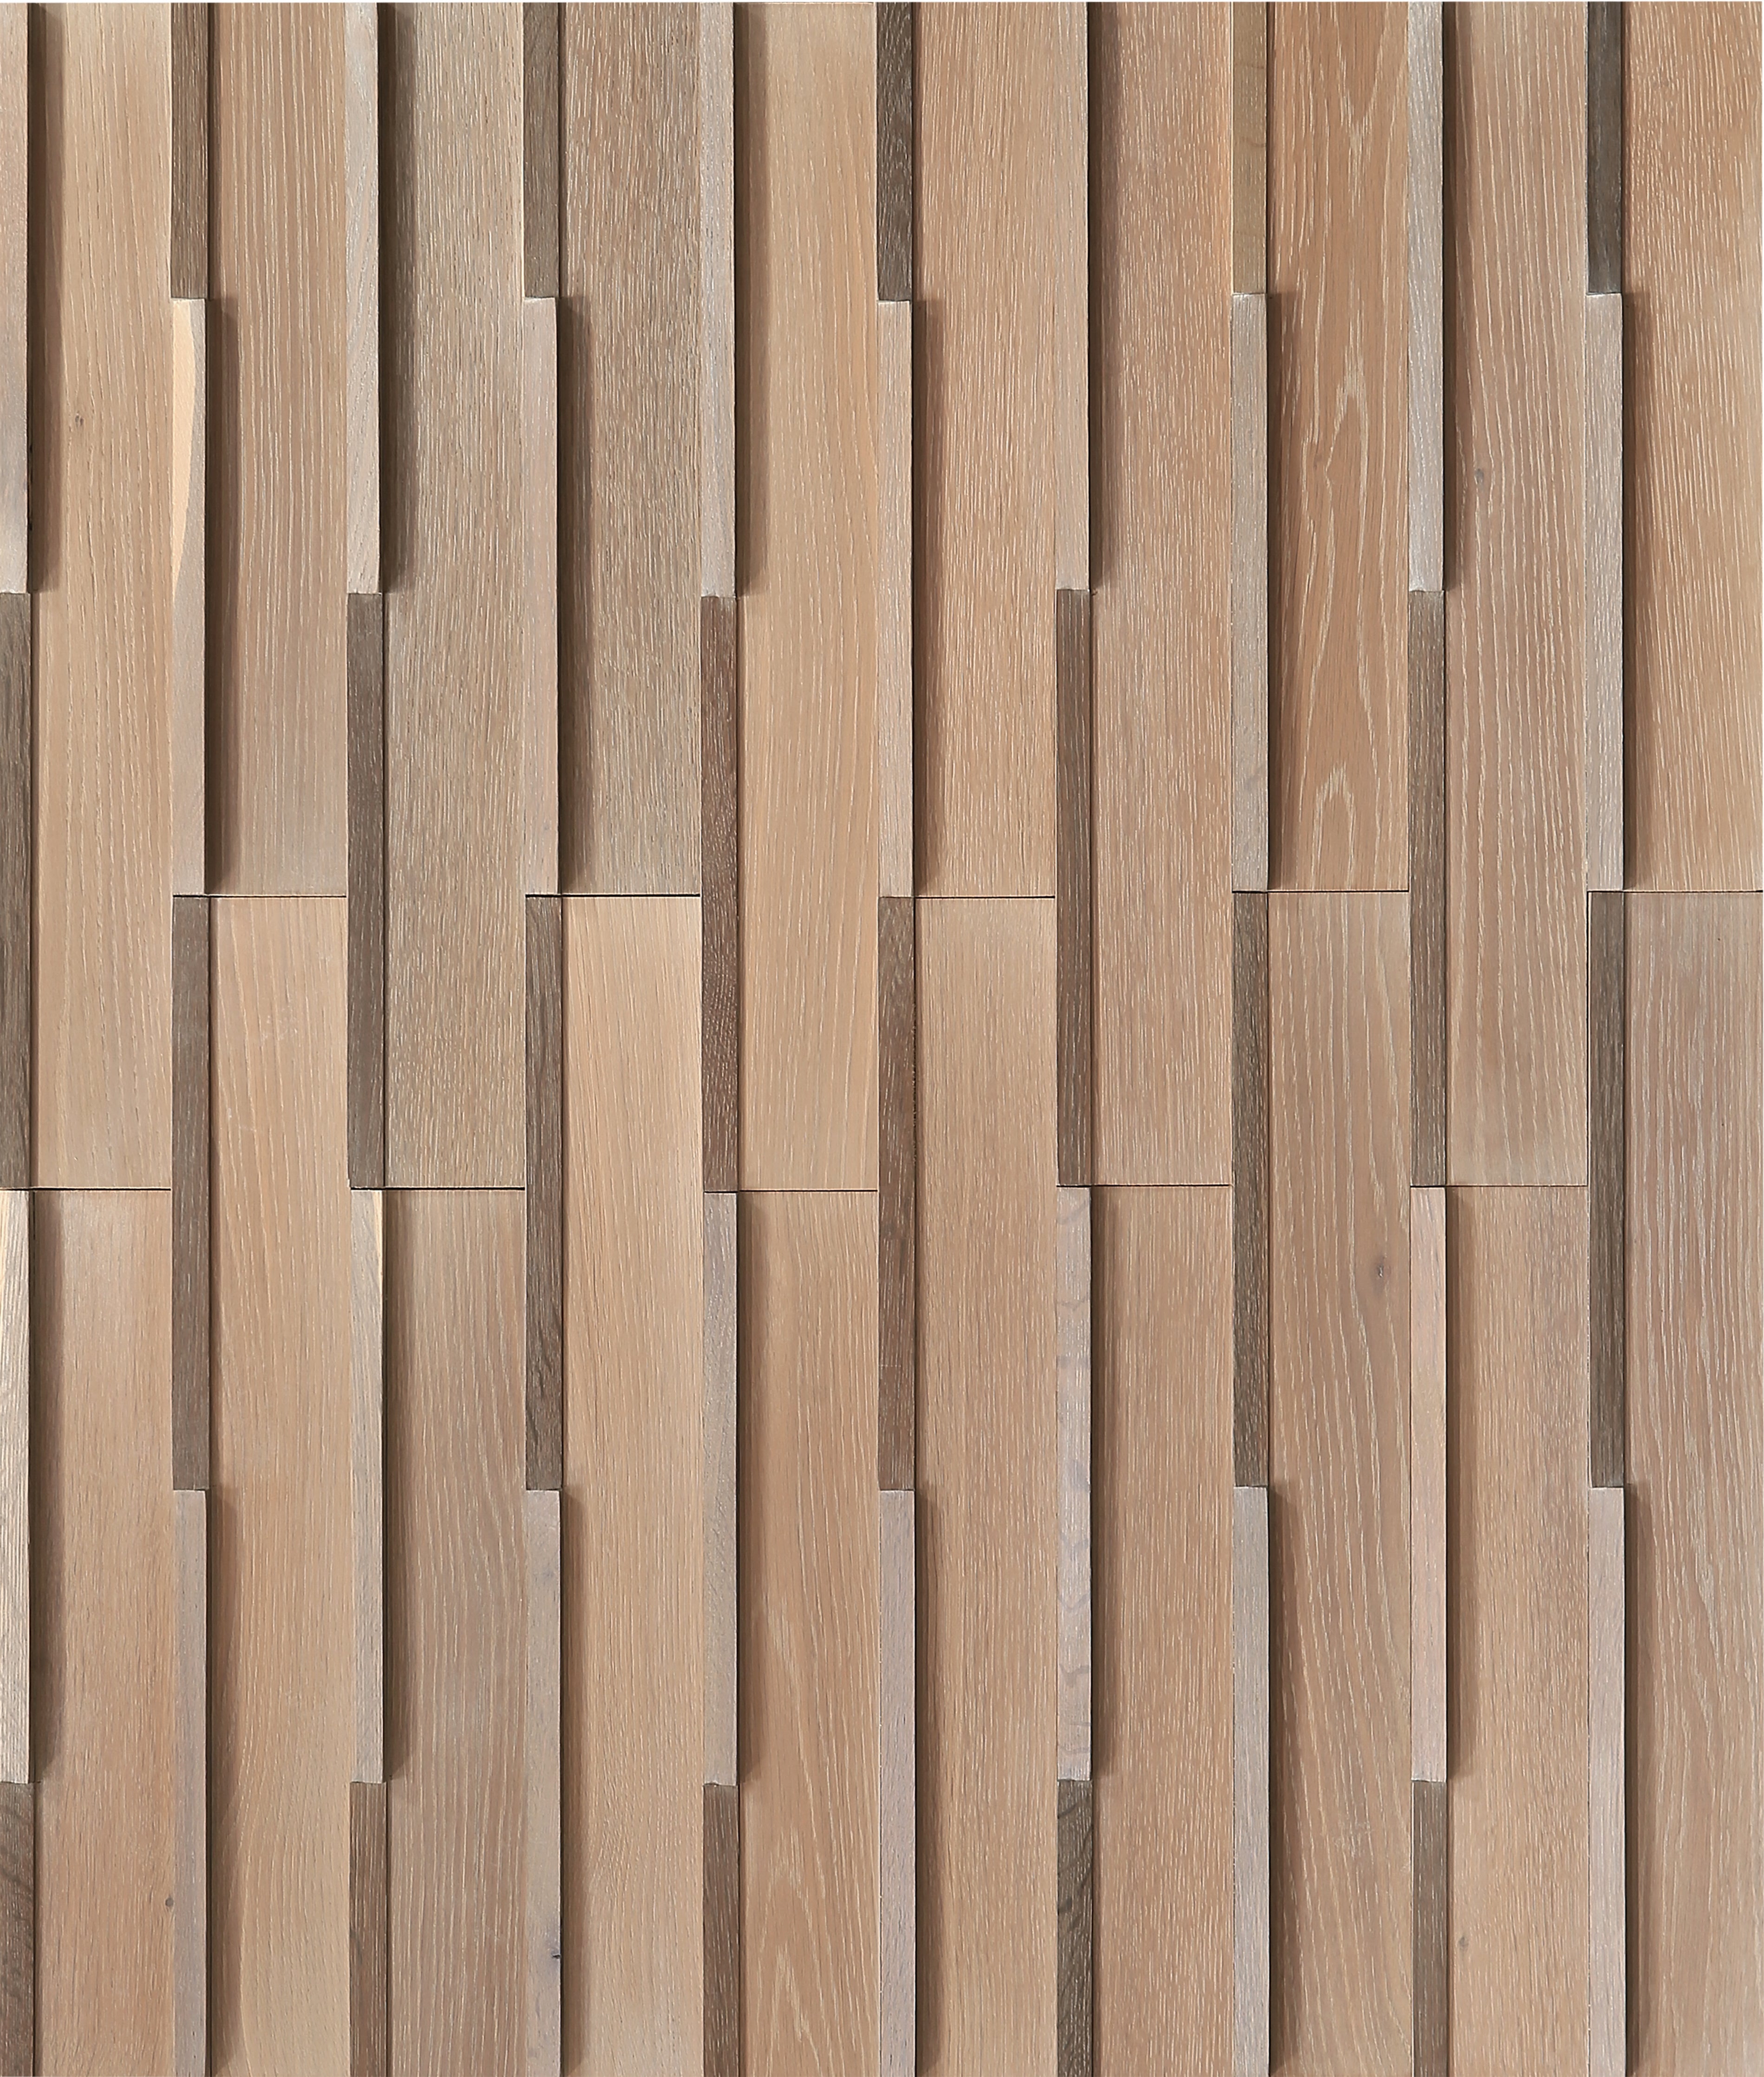 duchateau inceptiv edge lugano oak three dimensional wall natural wood panel matte lacquer for interior use distributed by surface group international